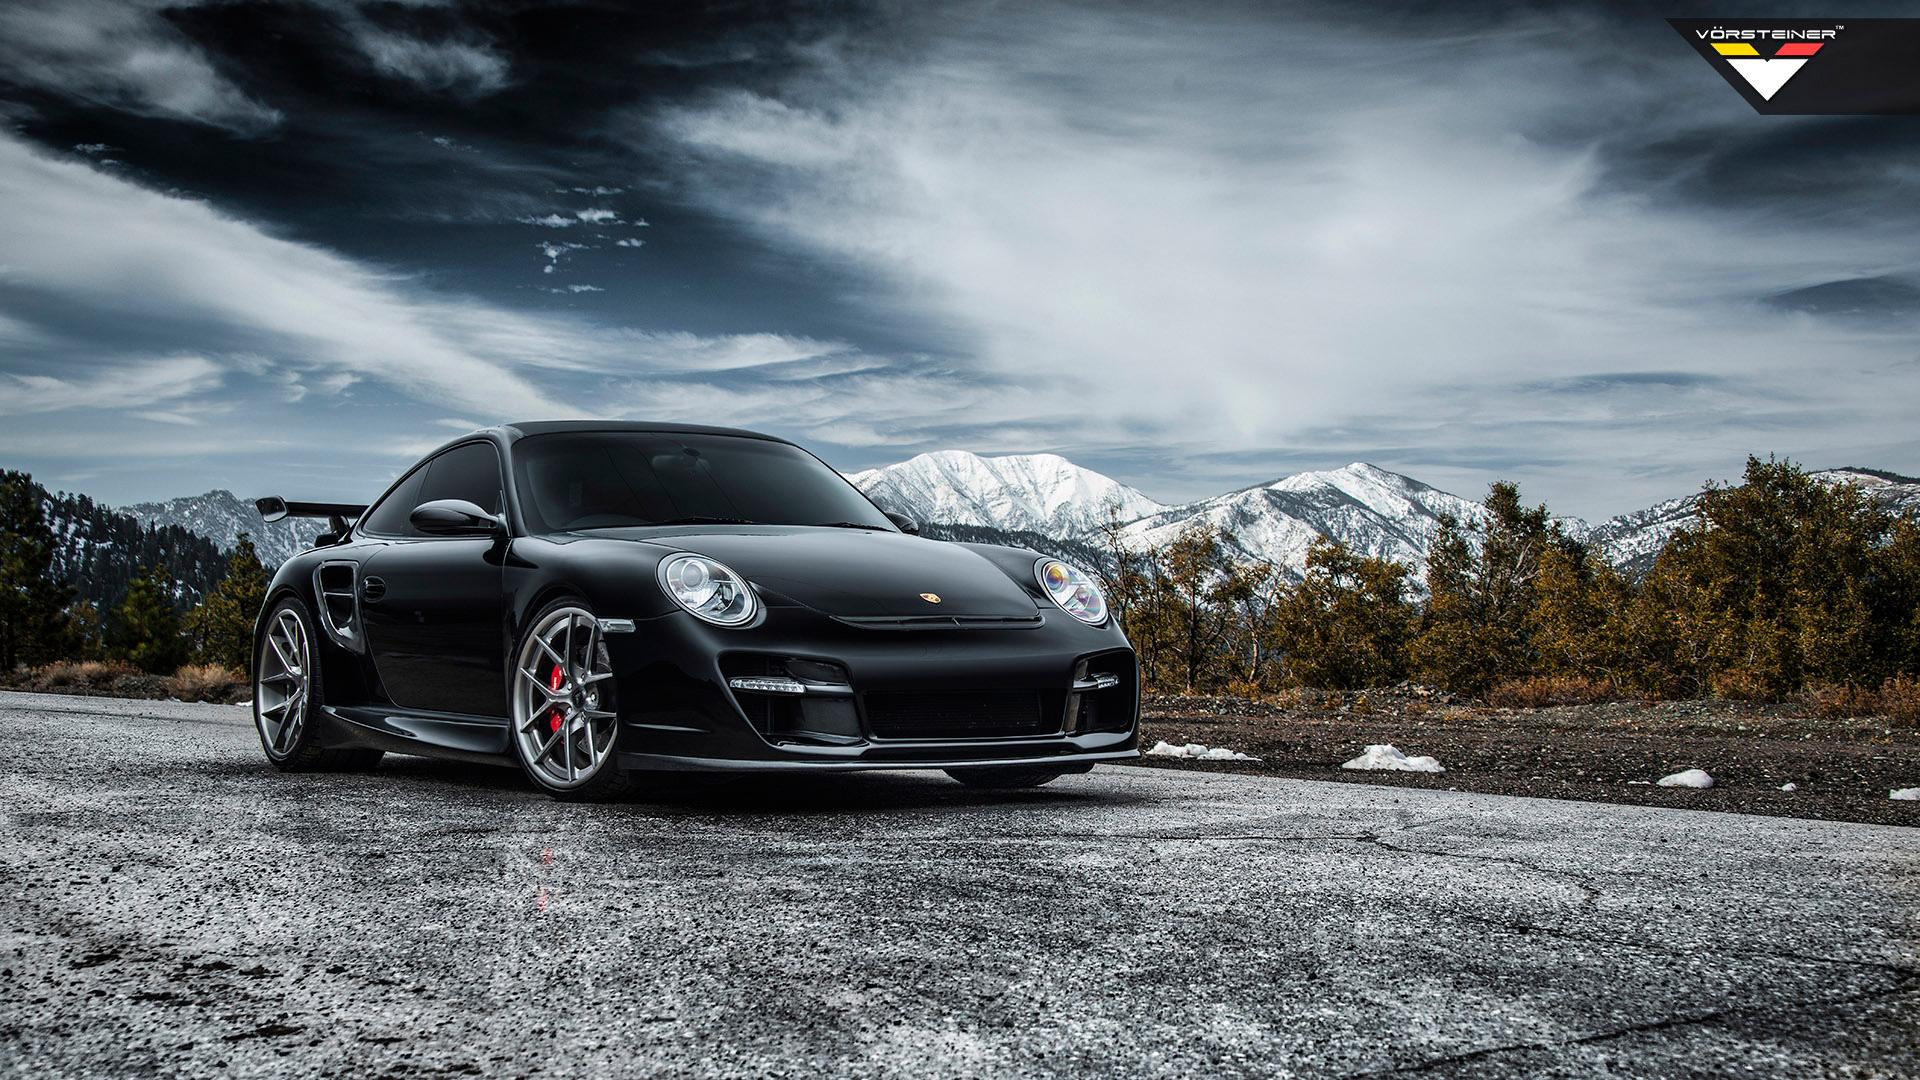 911 Turbo Wallpapers - Top Free 911